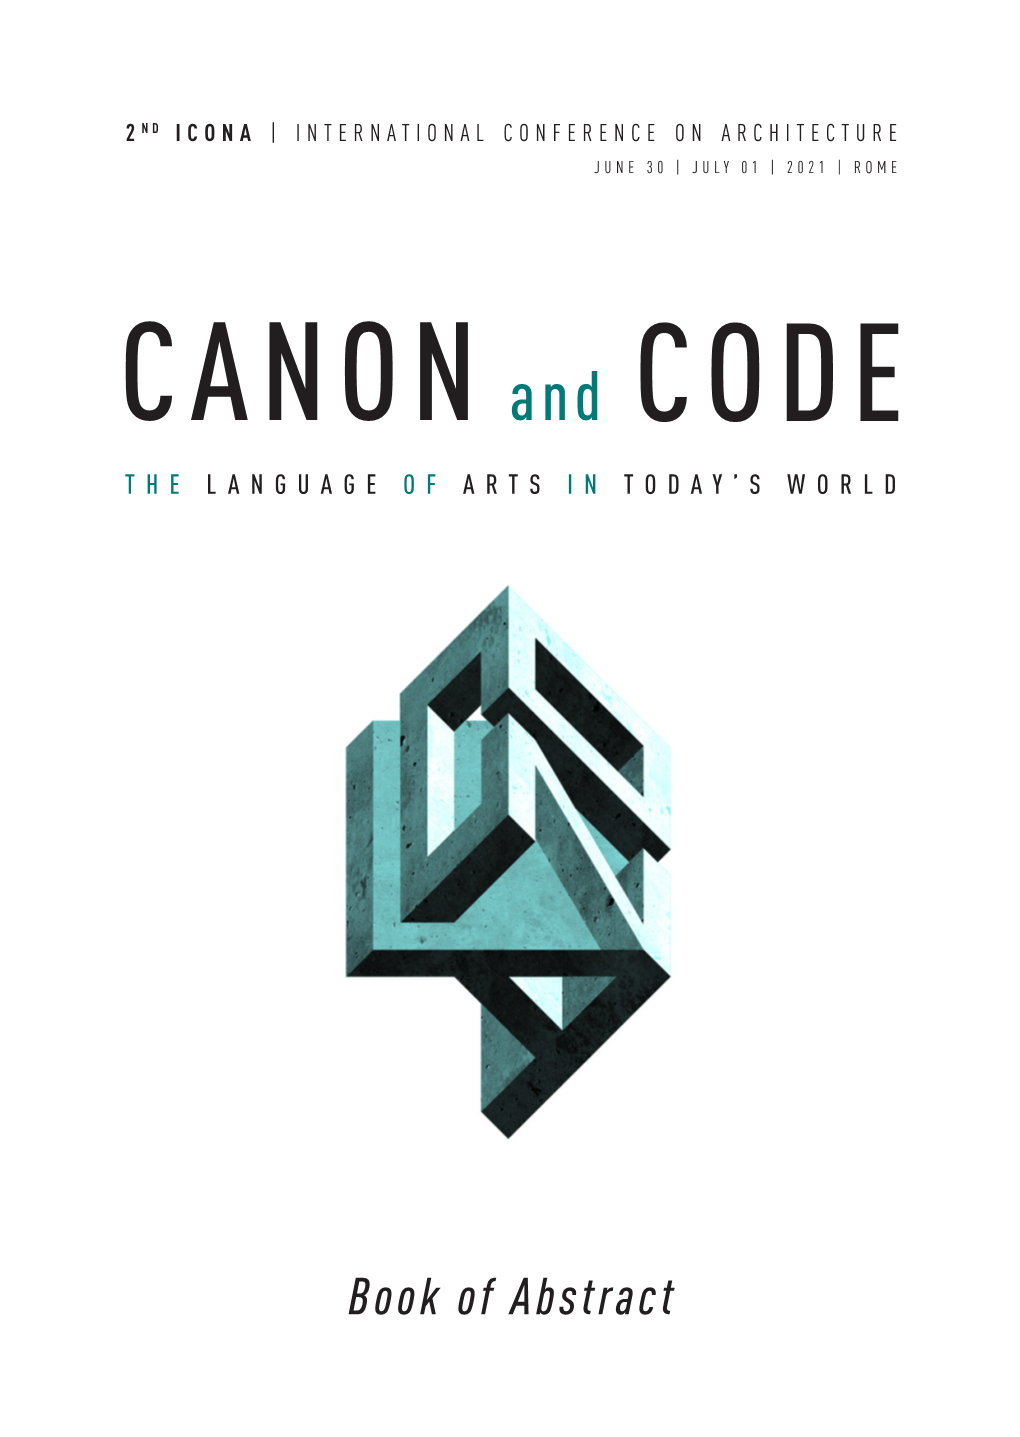 CANON and CODE the LANGUAGE of ARTS in TODAY’S WORLD